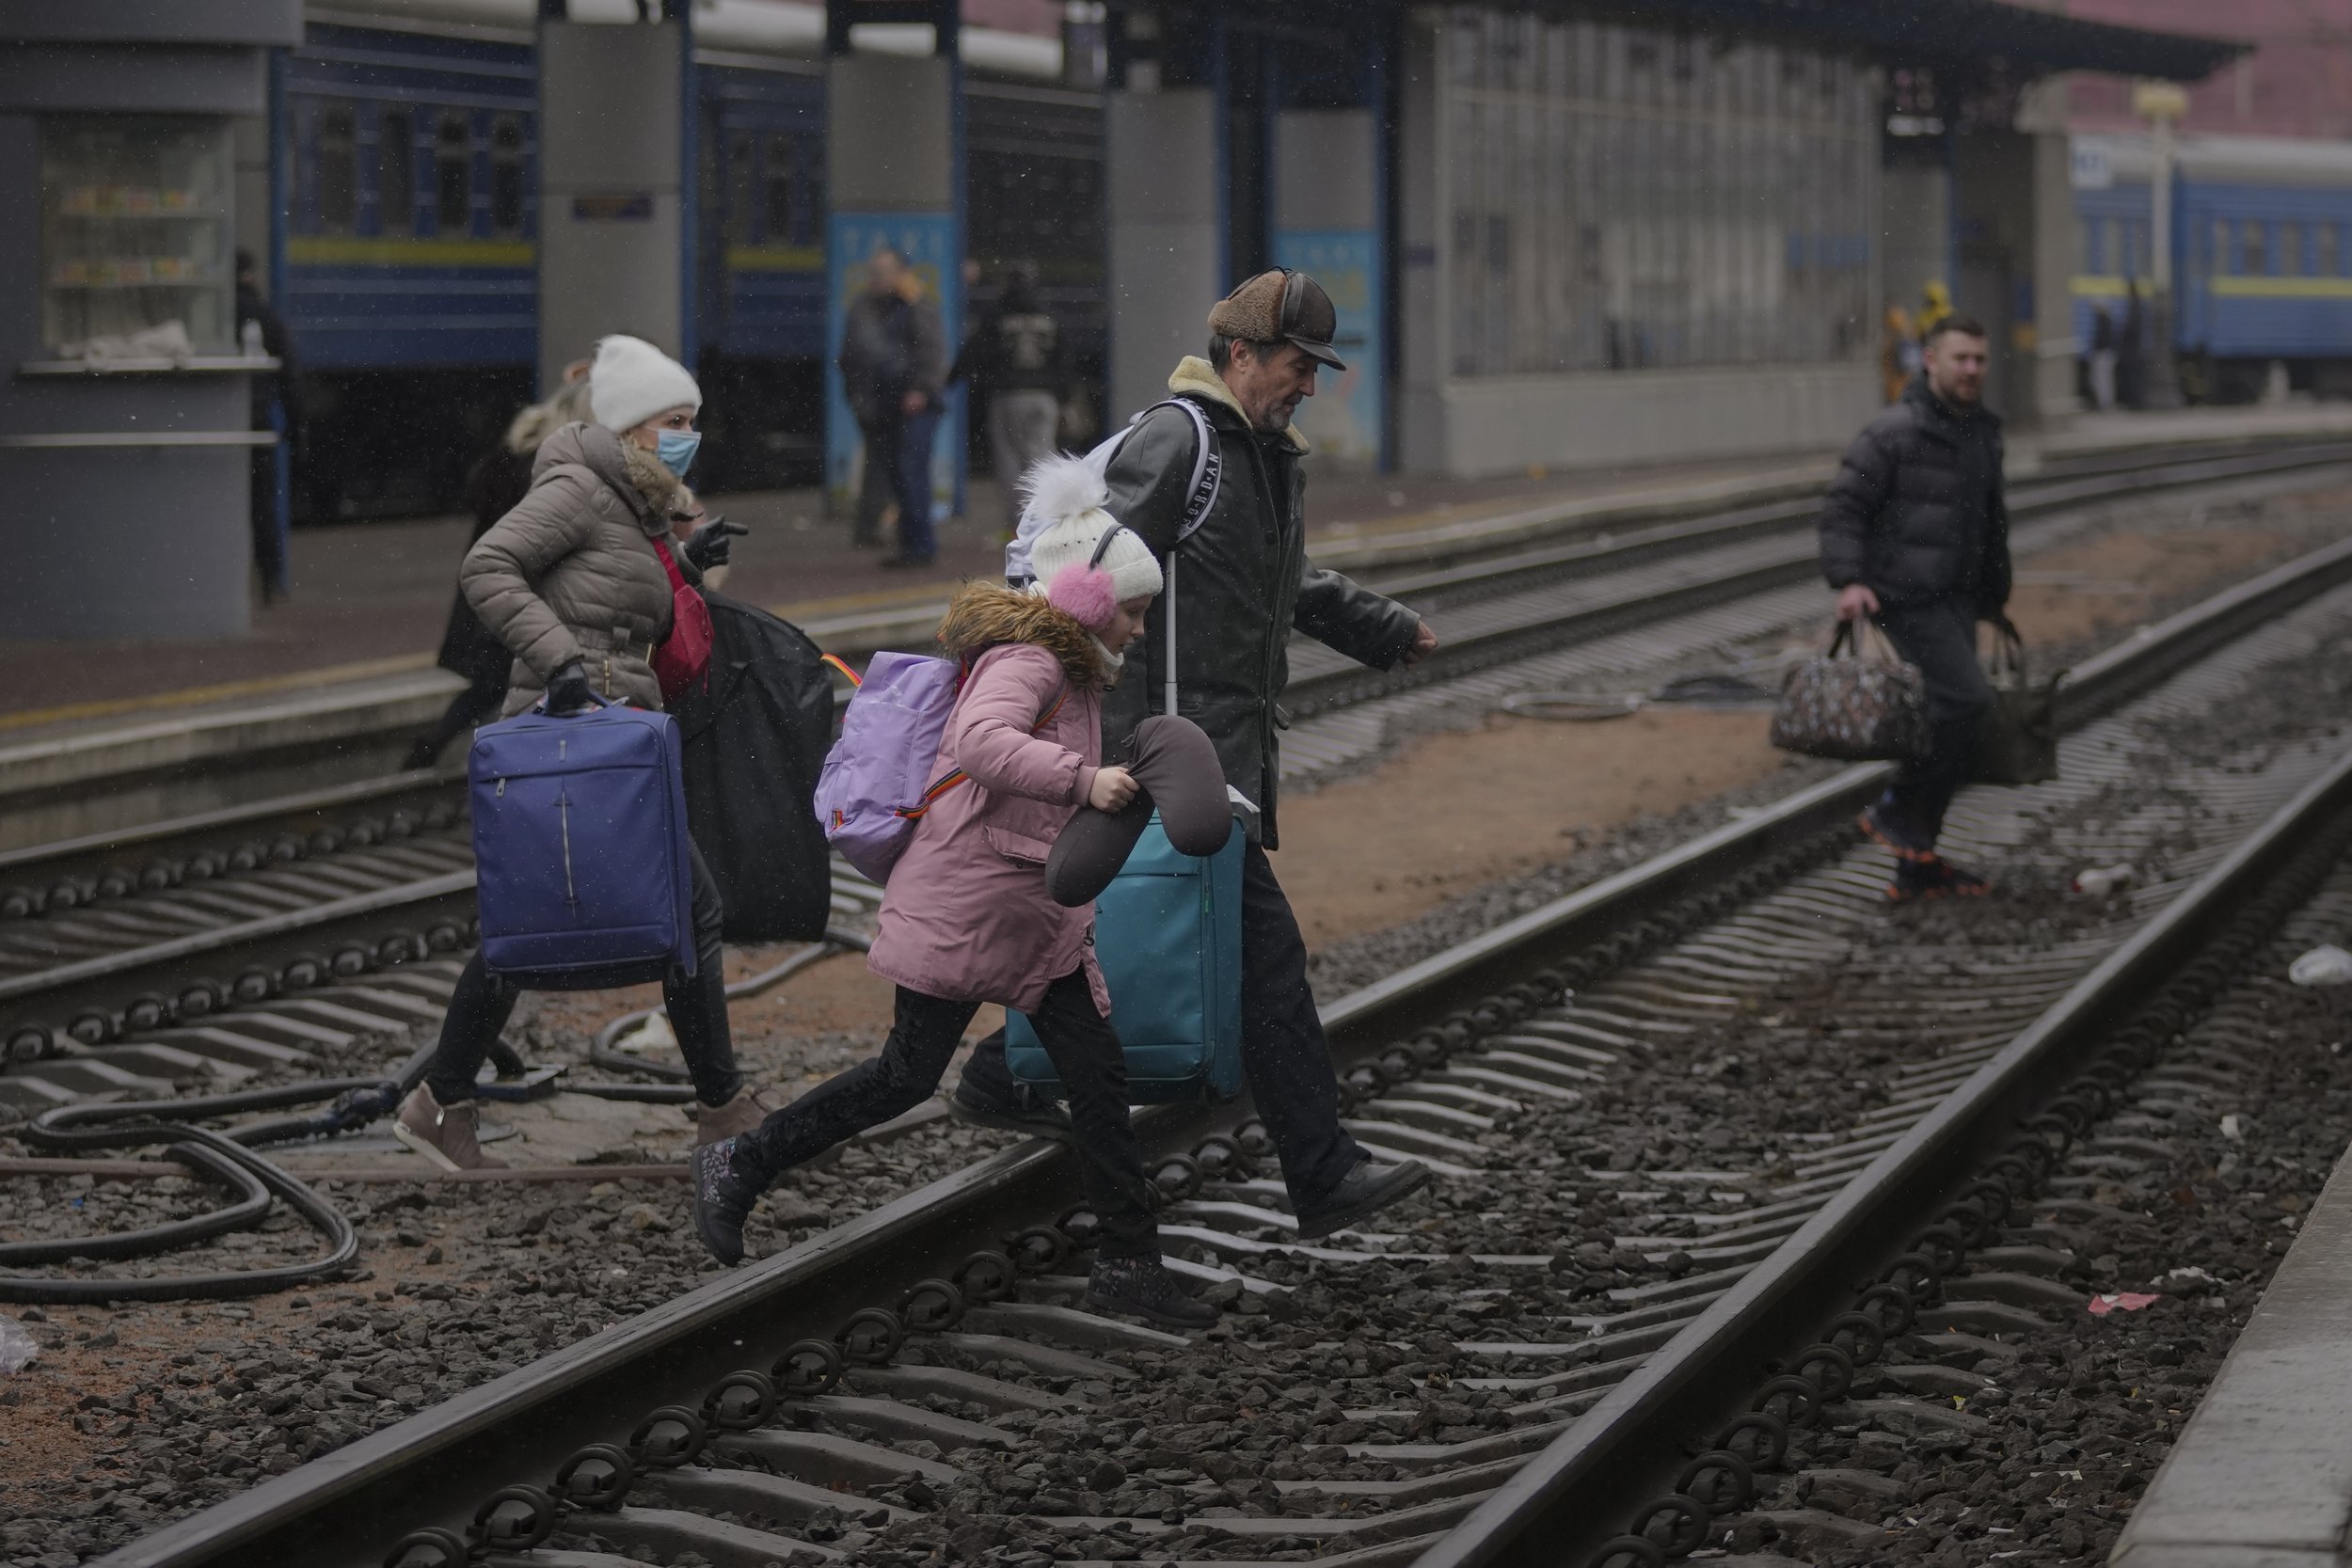  A family runs over the tracks trying to board a Lviv bound train, in Kyiv, Ukraine, Thursday, March 3, 2022. (AP Photo/Vadim Ghirda) 